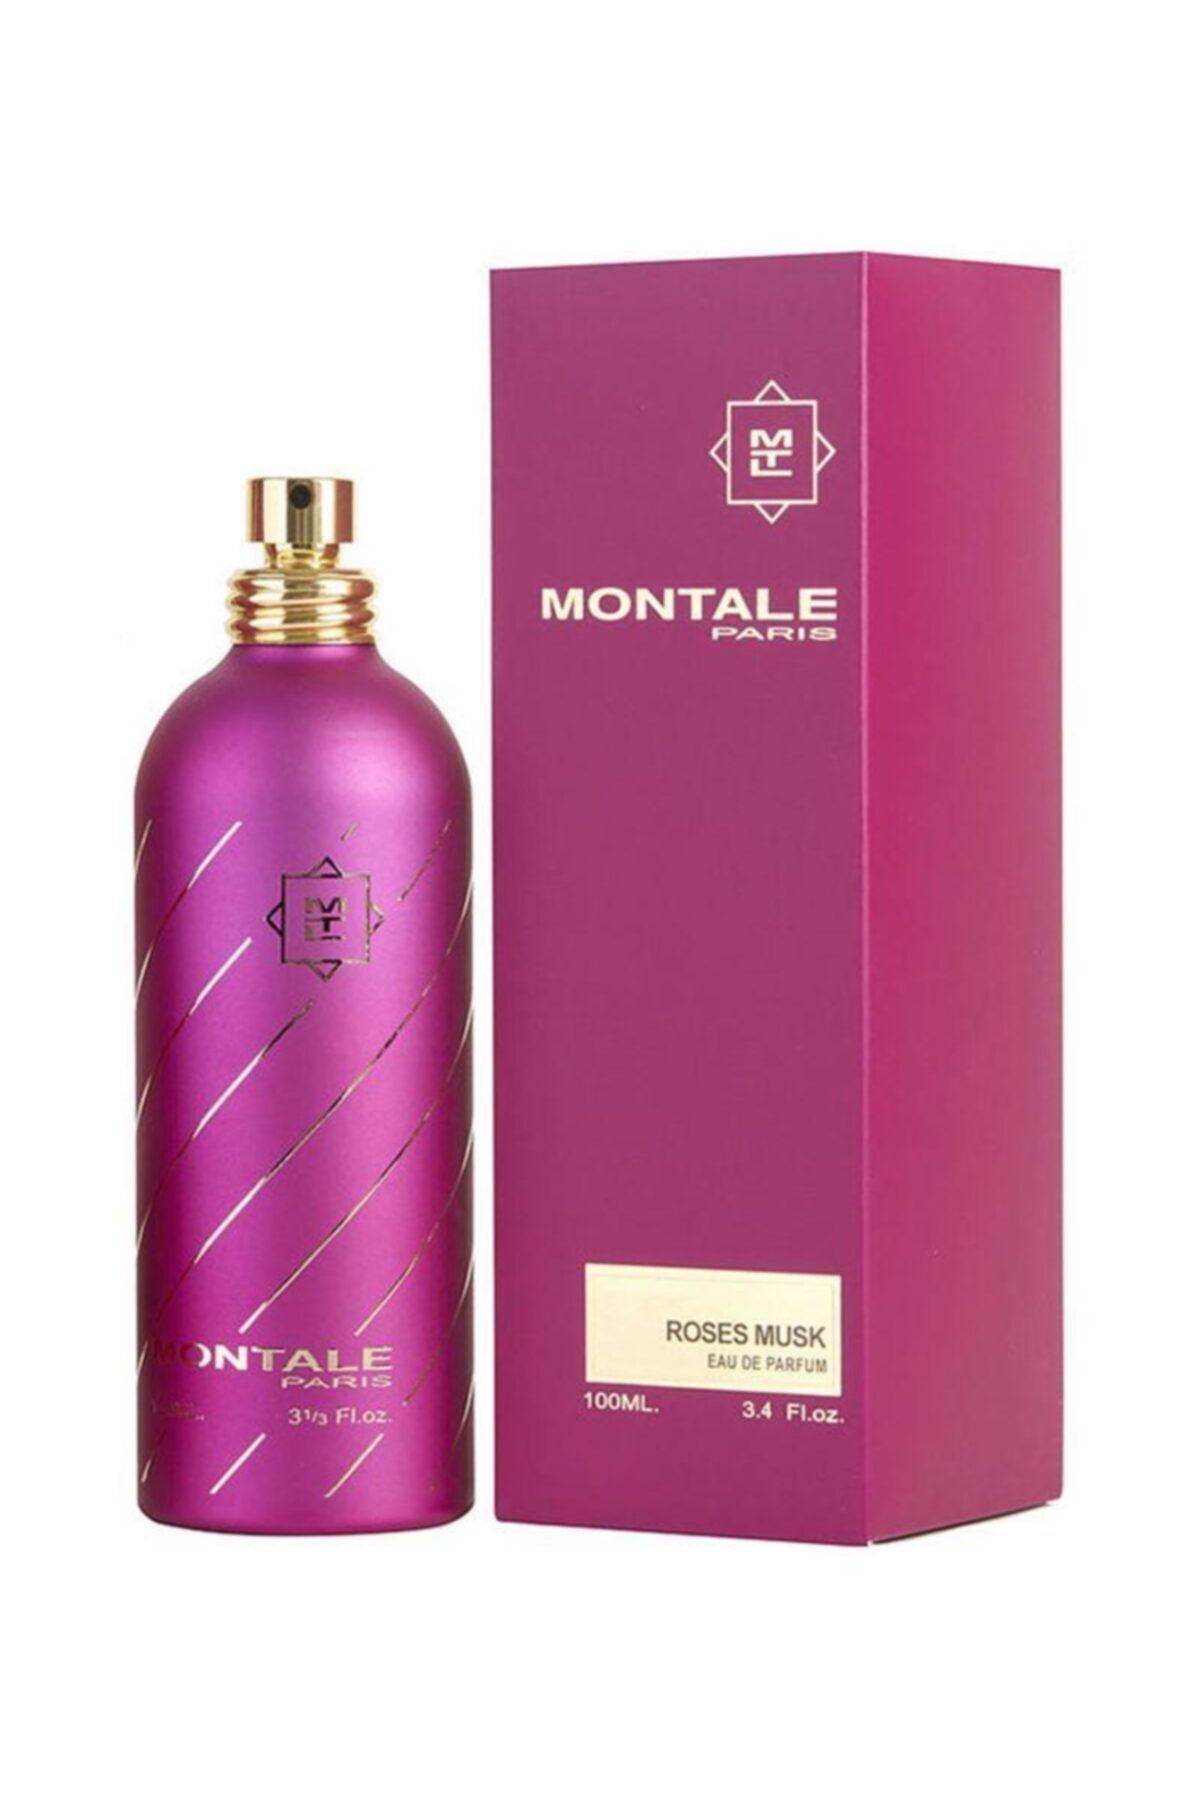 Roses musk парфюмерная вода. Духи Montale Paris Roses Musk. Roses Musk EDP 100ml.